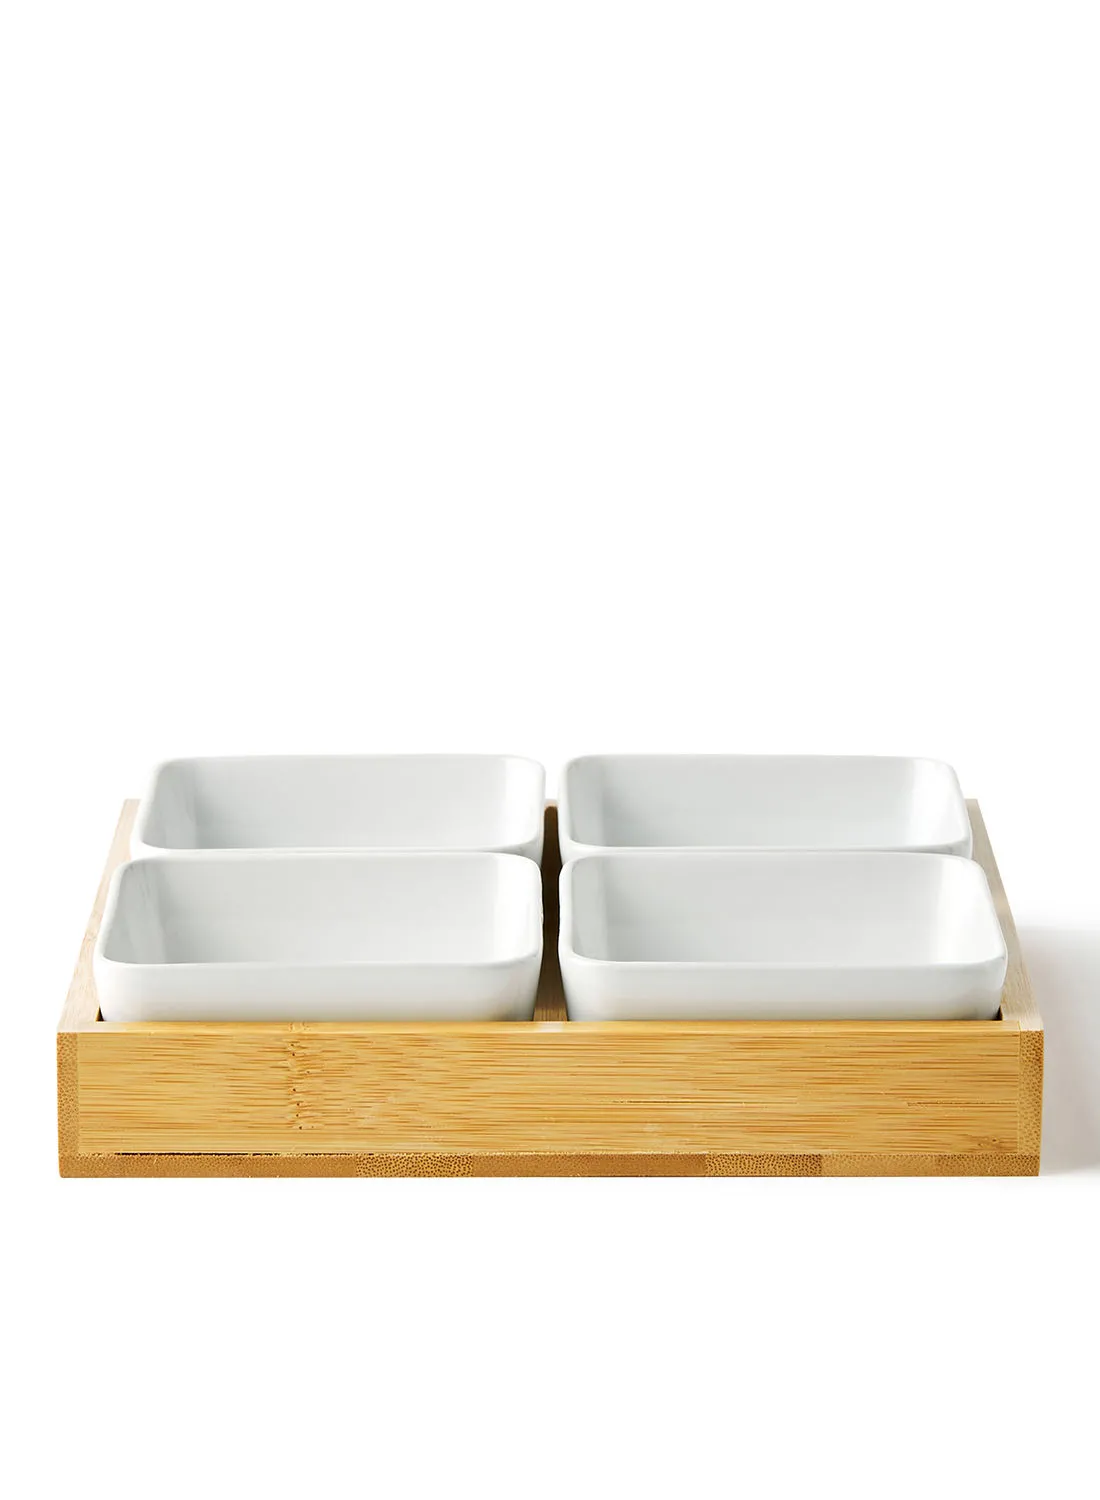 Noon East Serving Set - Made Of Bamboo & Ceramic - Serving Plate - Serving Dishes - Tray - Bowls, Tray Brown/White Brown/White